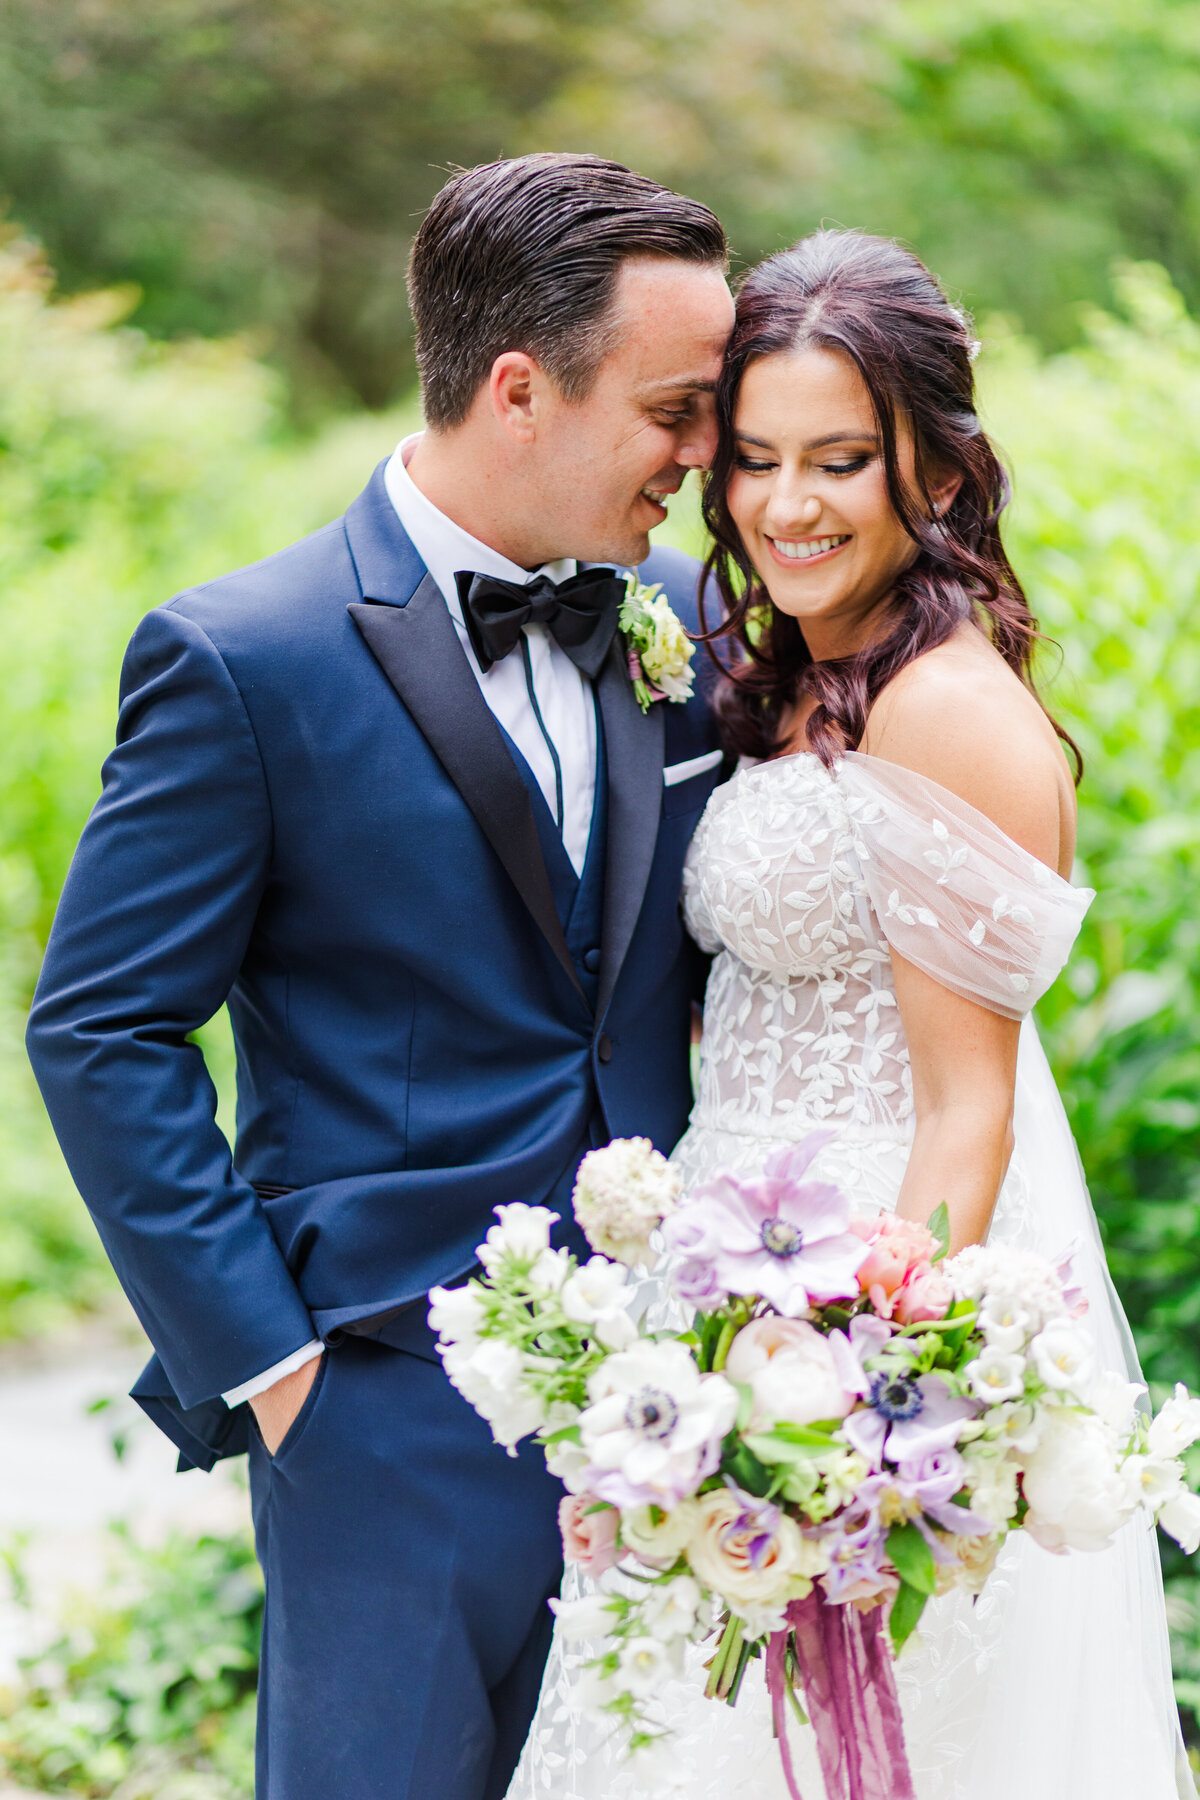 stunning bride and groom with gorgeous purple spring floral bouquet